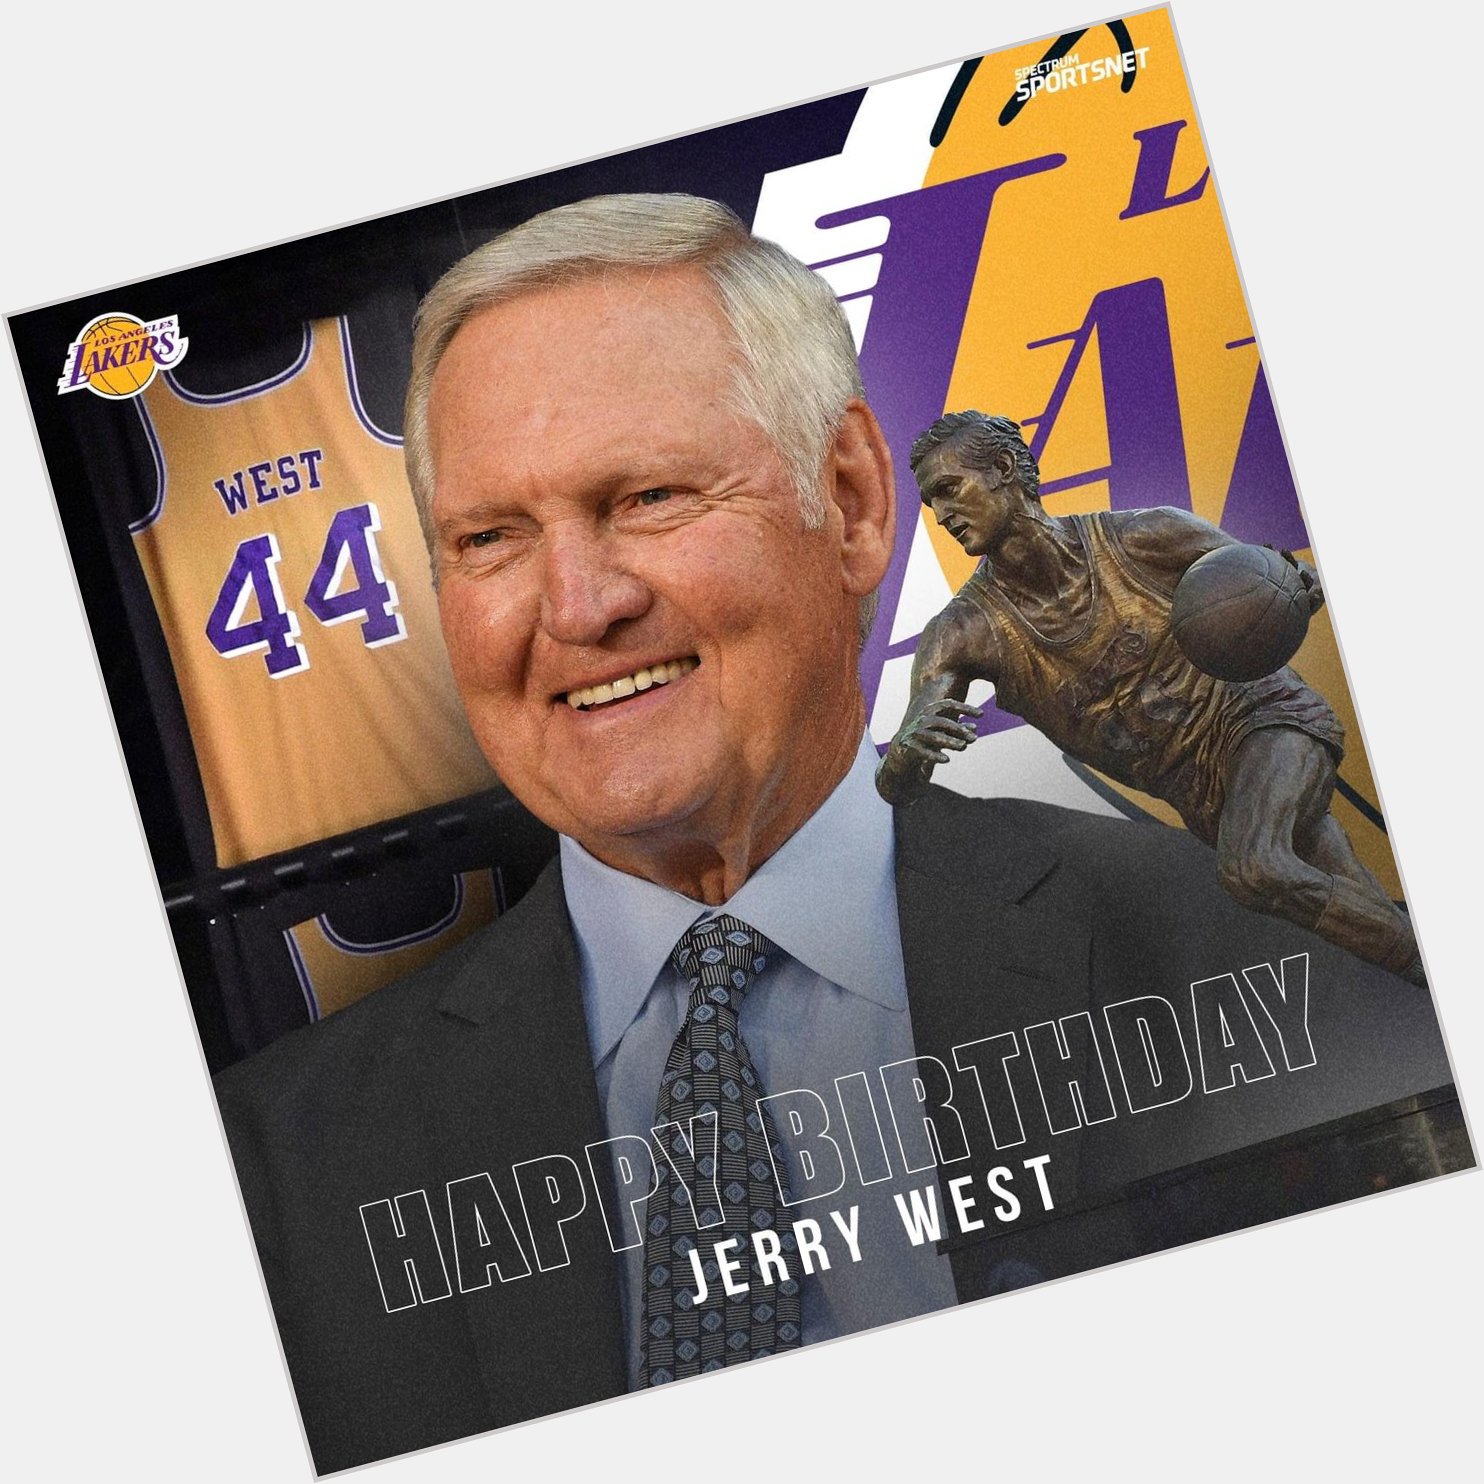 Join in wishing Jerry West a very happy birthday!  